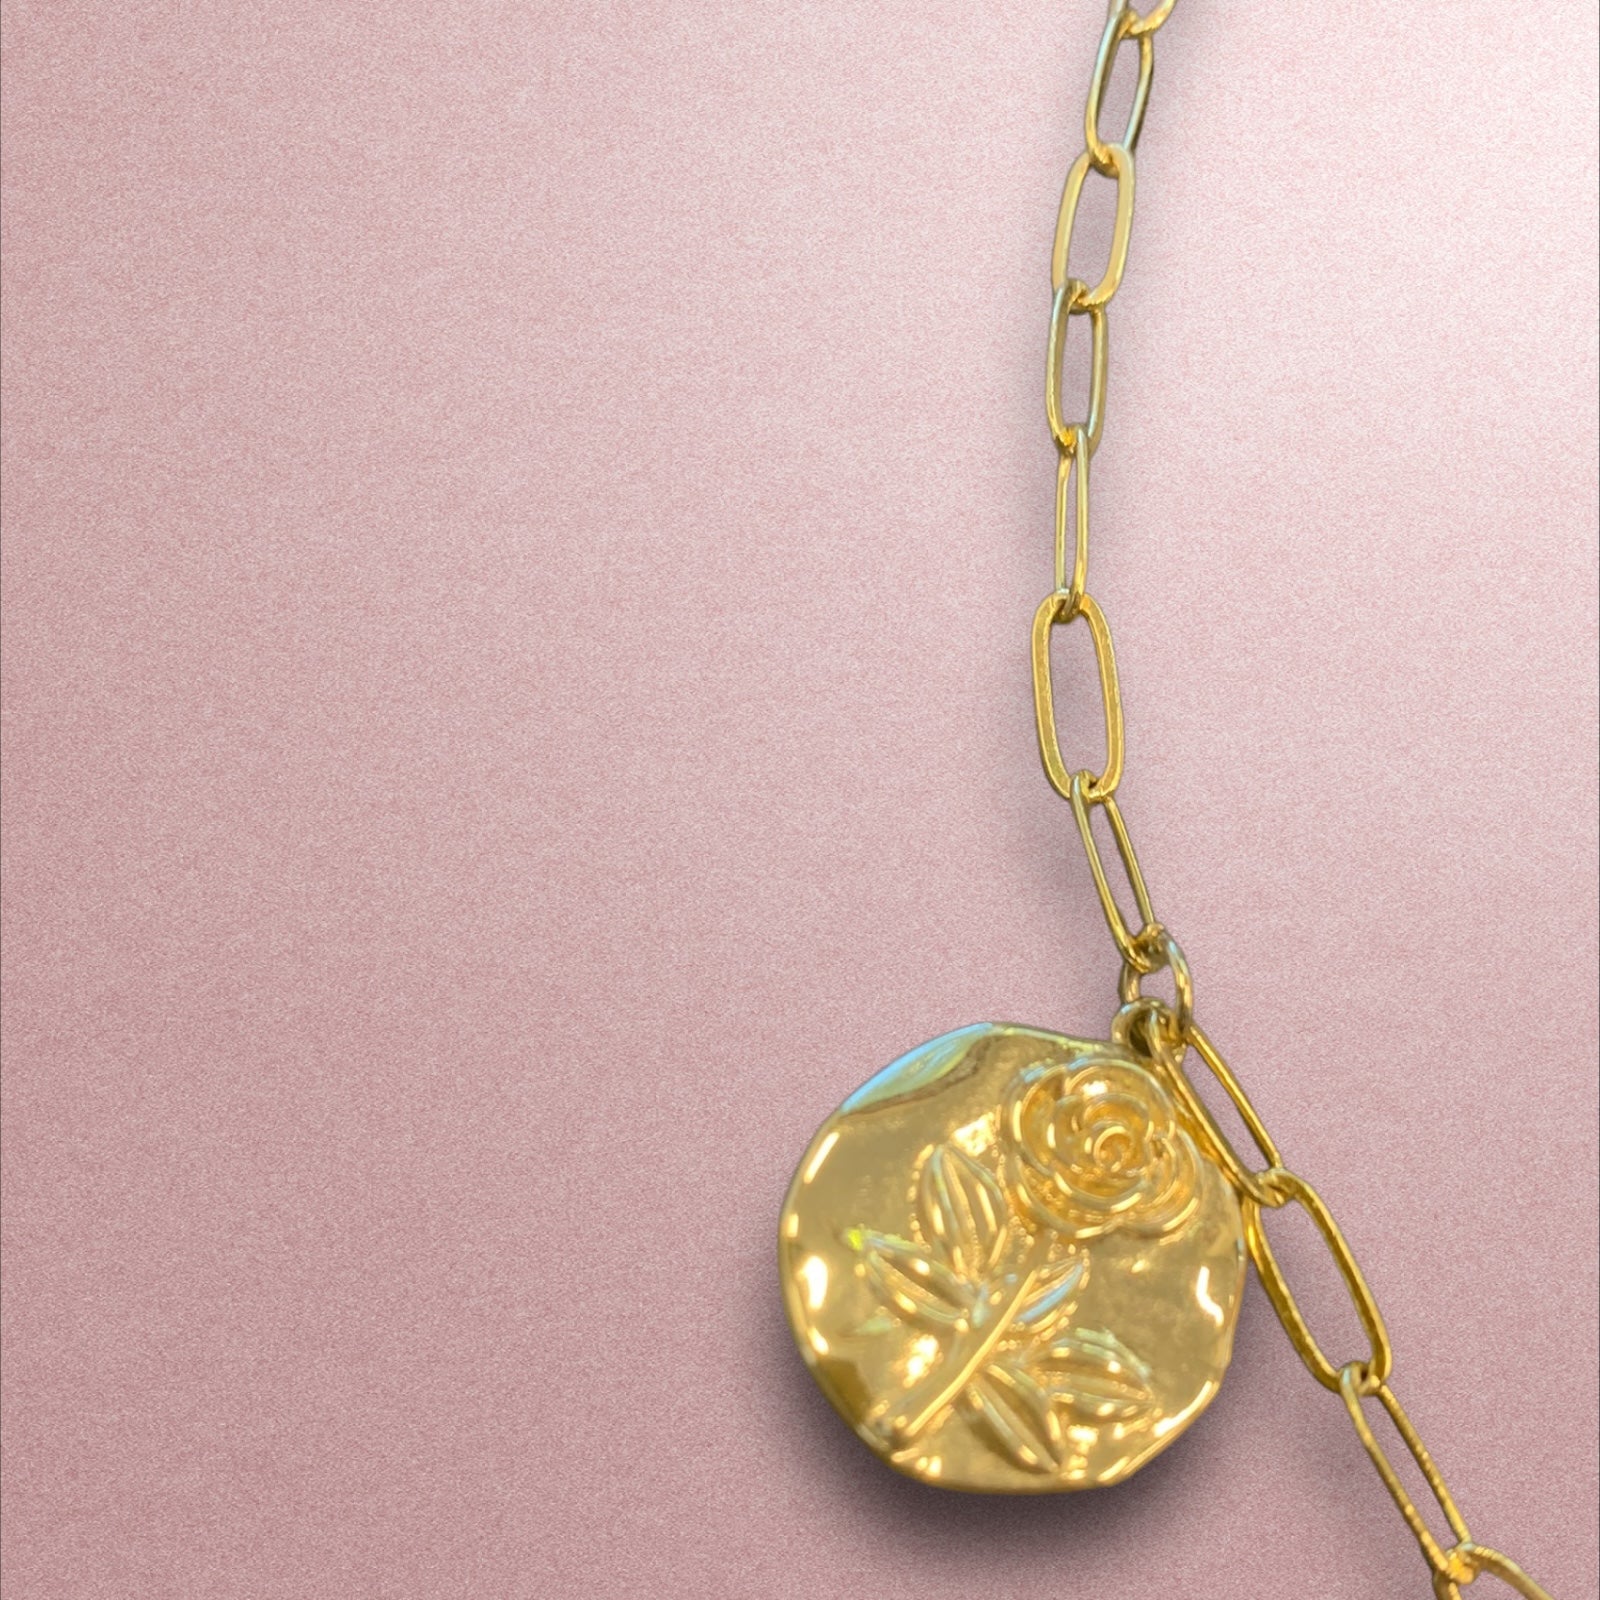 1 of 1 Gold and Pink Moon Tarot Charm Necklace-Necklace